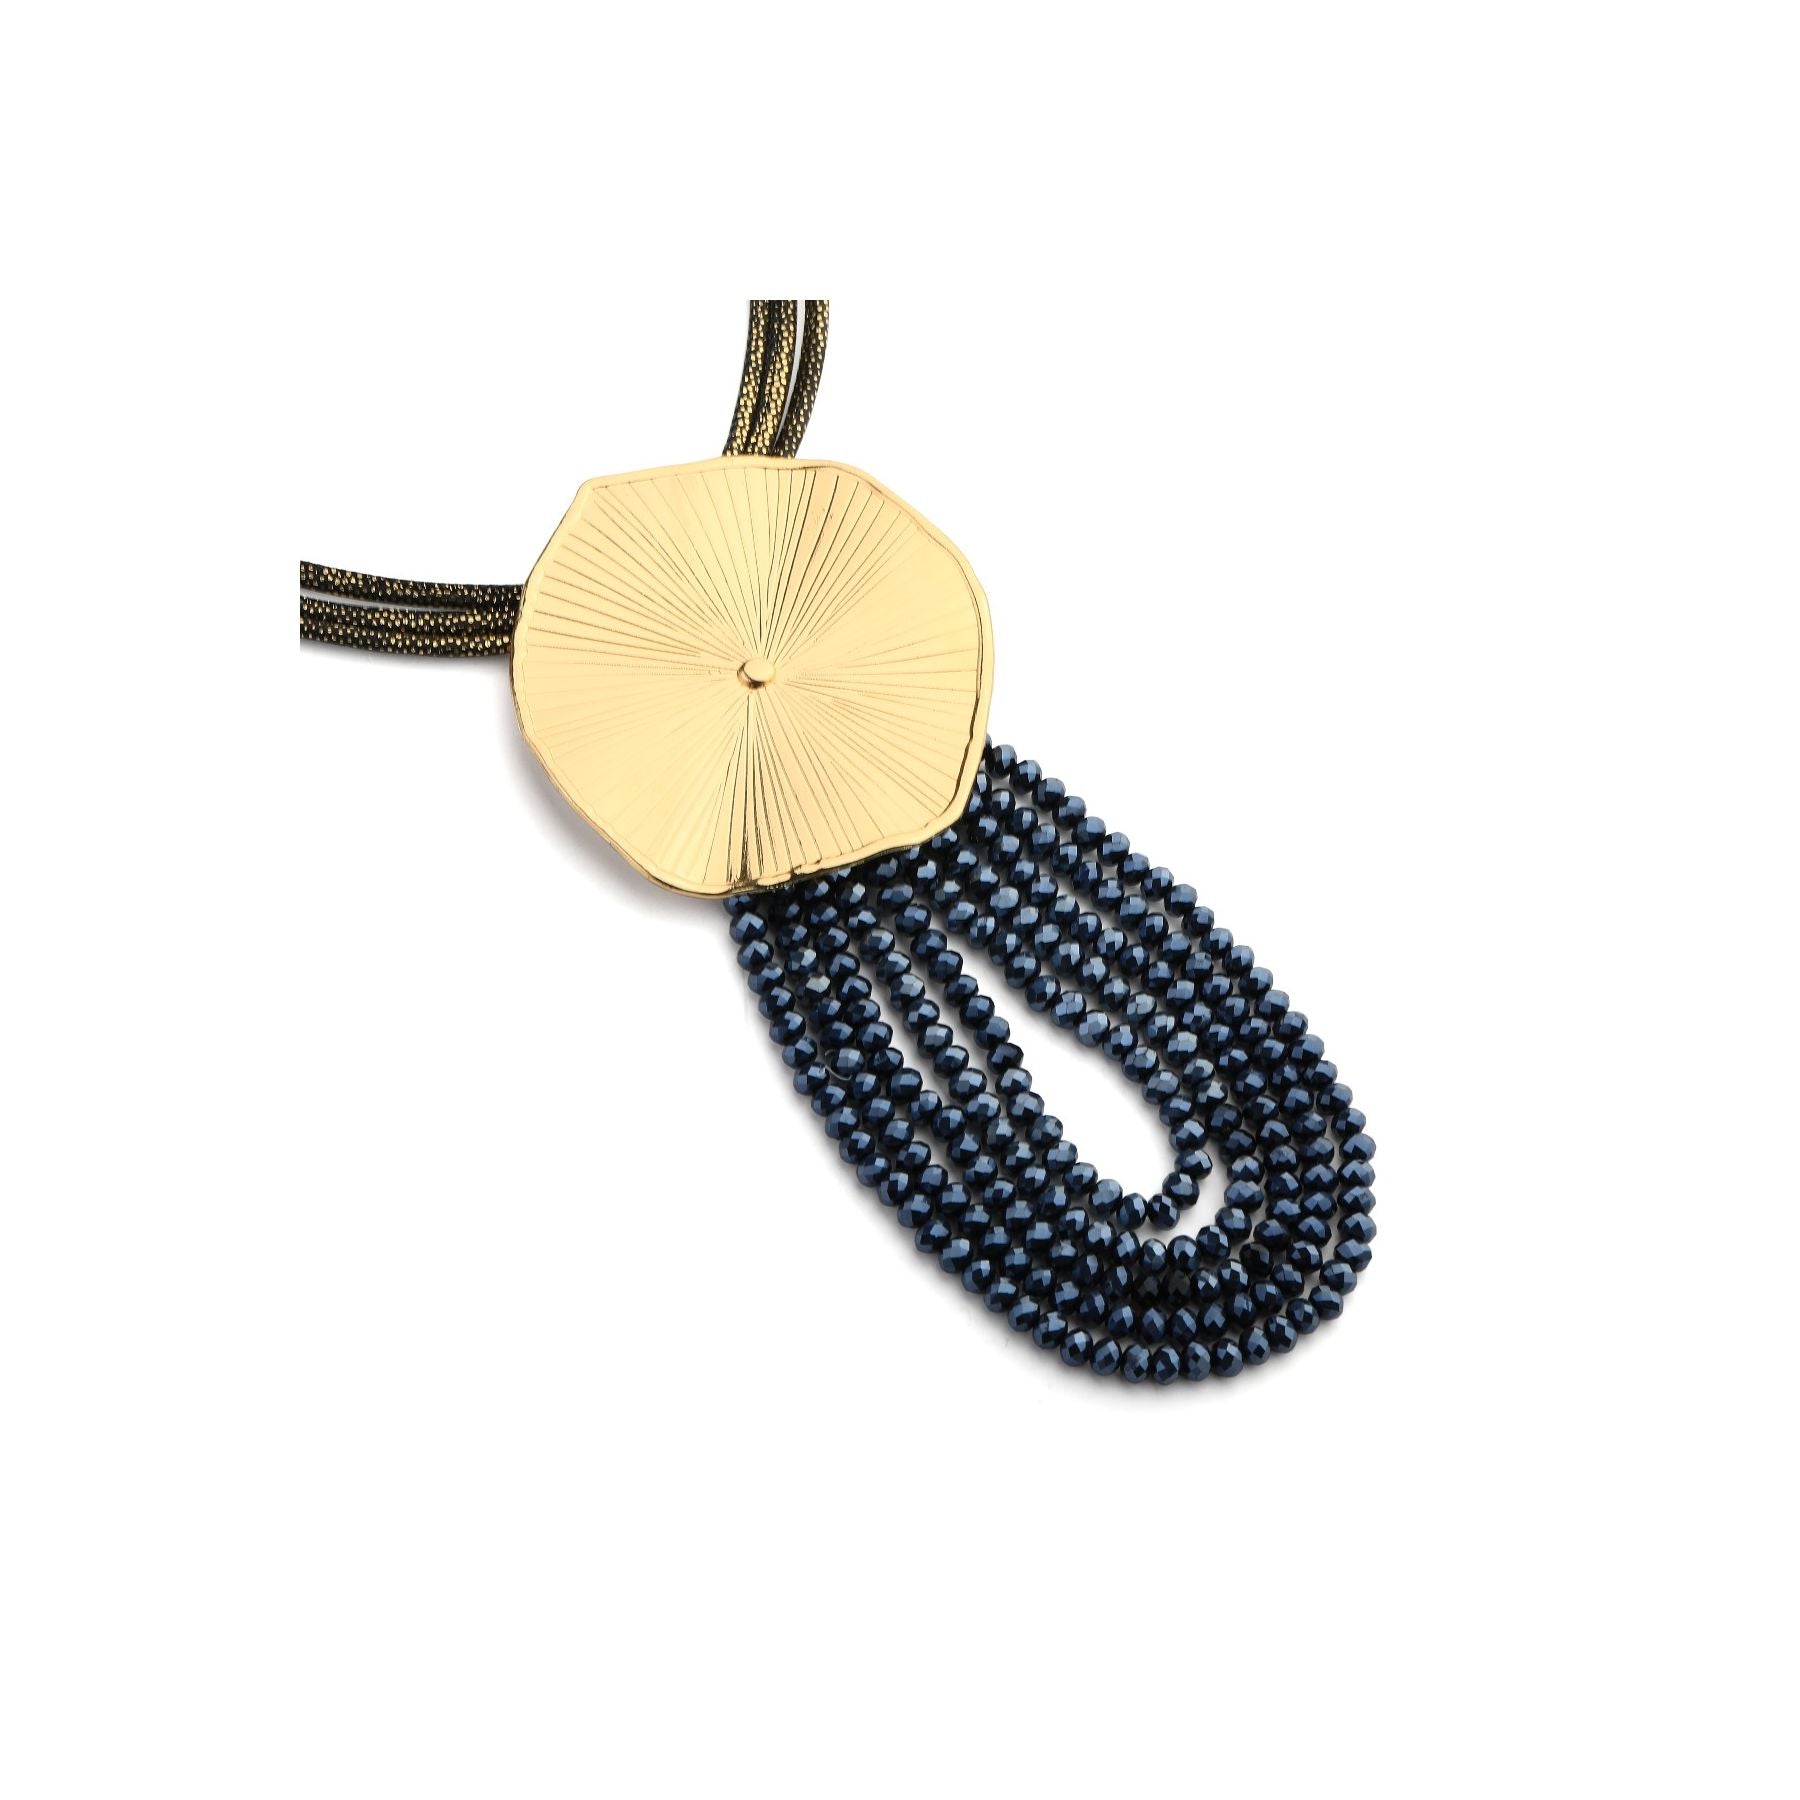 Yellow Gold Lilypad on Black Cord with Sparkly Bead Tassle Adjustable Length Necklace from Frinkle